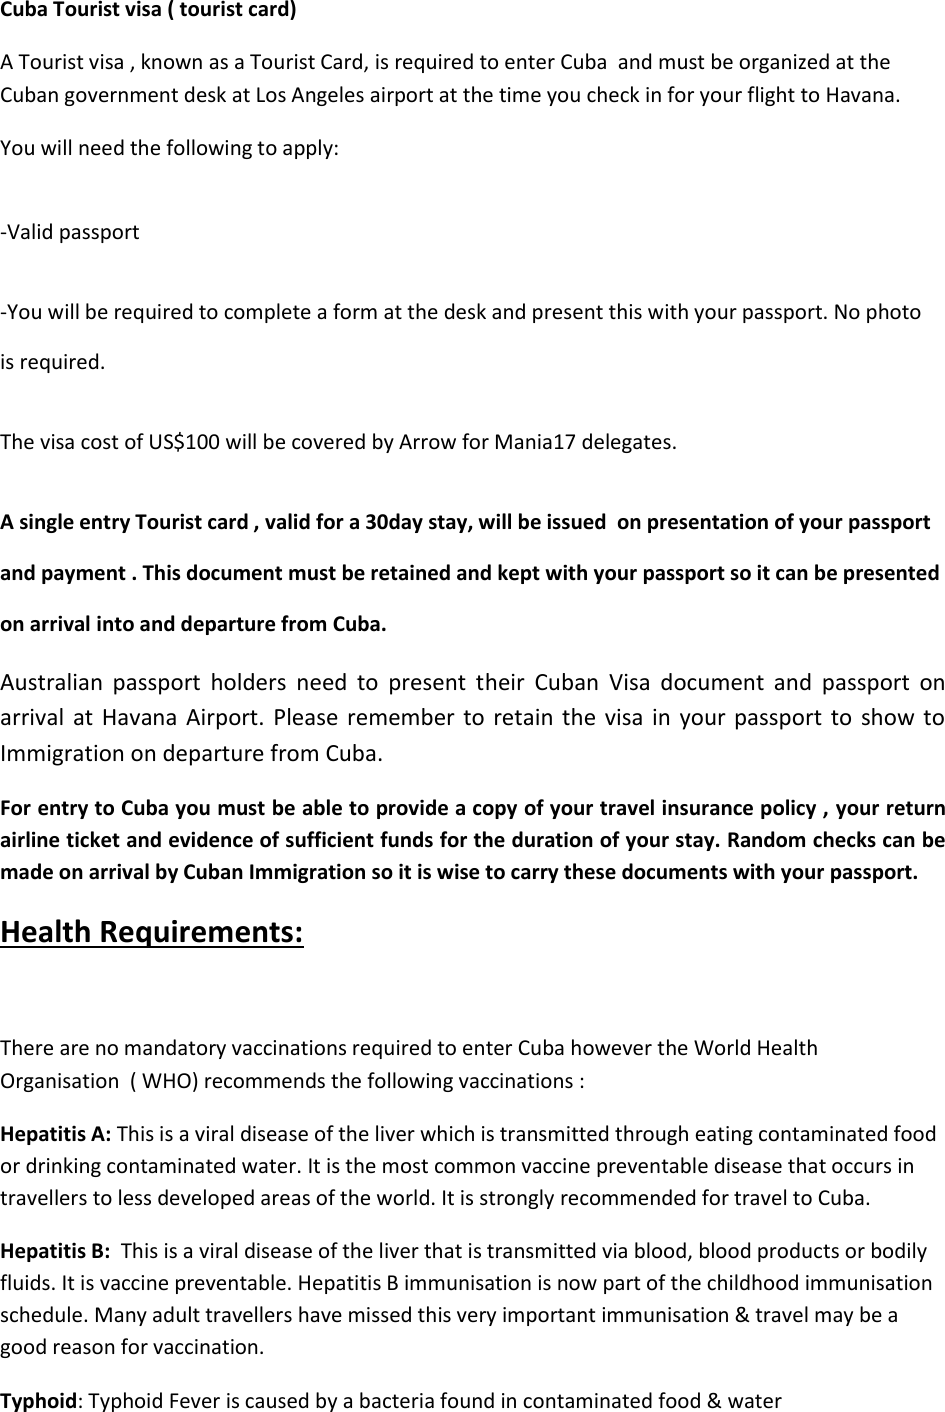 Page 2 of 3 - Travel-s-and-Health-Requirements-for-travel-to-Cuba